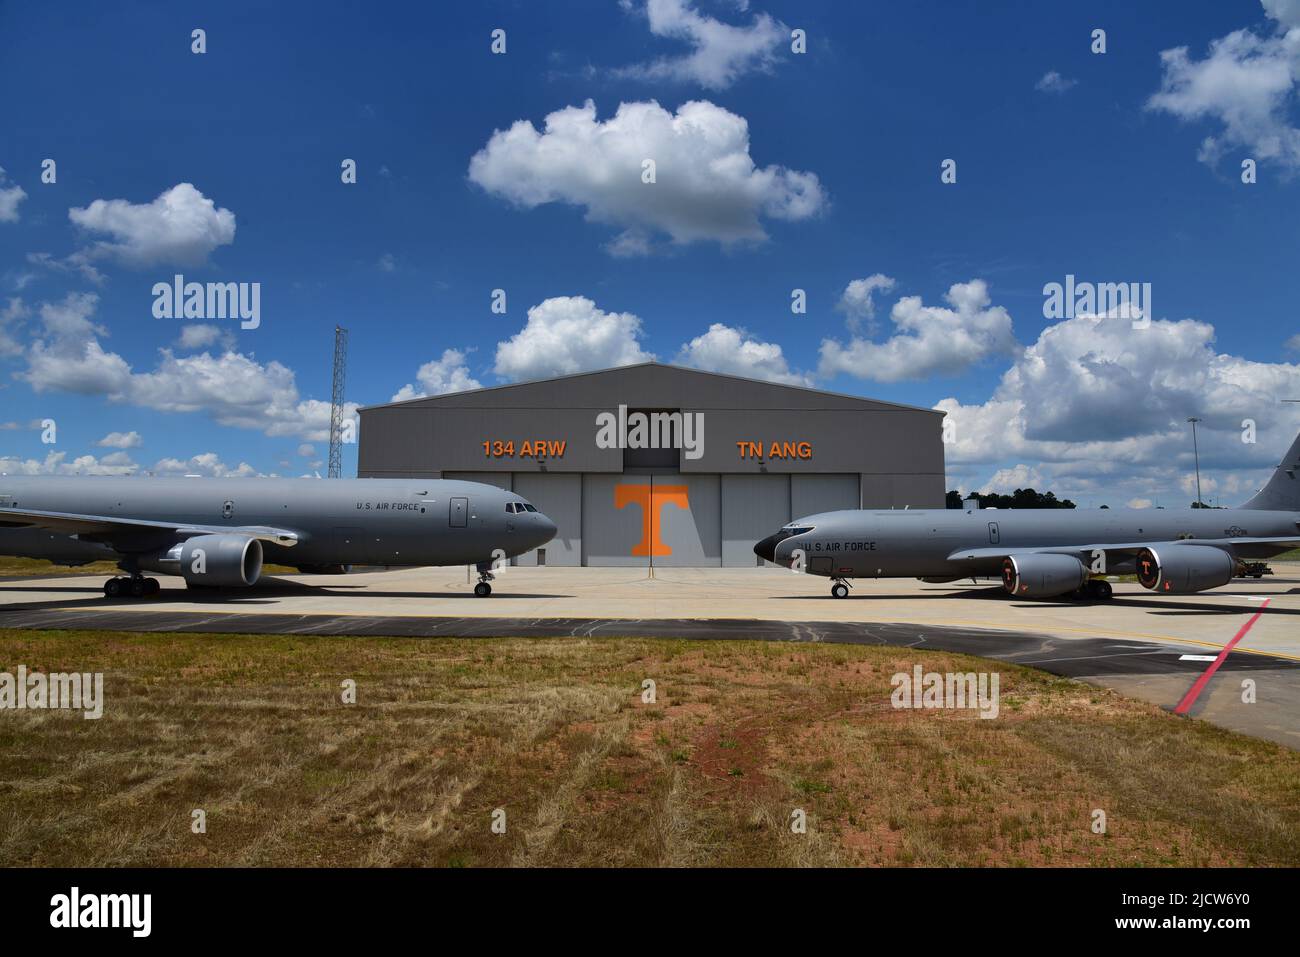 A KC-135R Stratotanker and a KC-46A Pegasus, both aerial refueling aircraft, sit in front of the new $31 million aircraft maintenance hangar at the 134th Air Refueling Wing, McGhee Tyson ANG Base, Tennessee.  The grand opening of the new hangar was held on Jun. 3, with Airmen and community members present for the event. Stock Photo